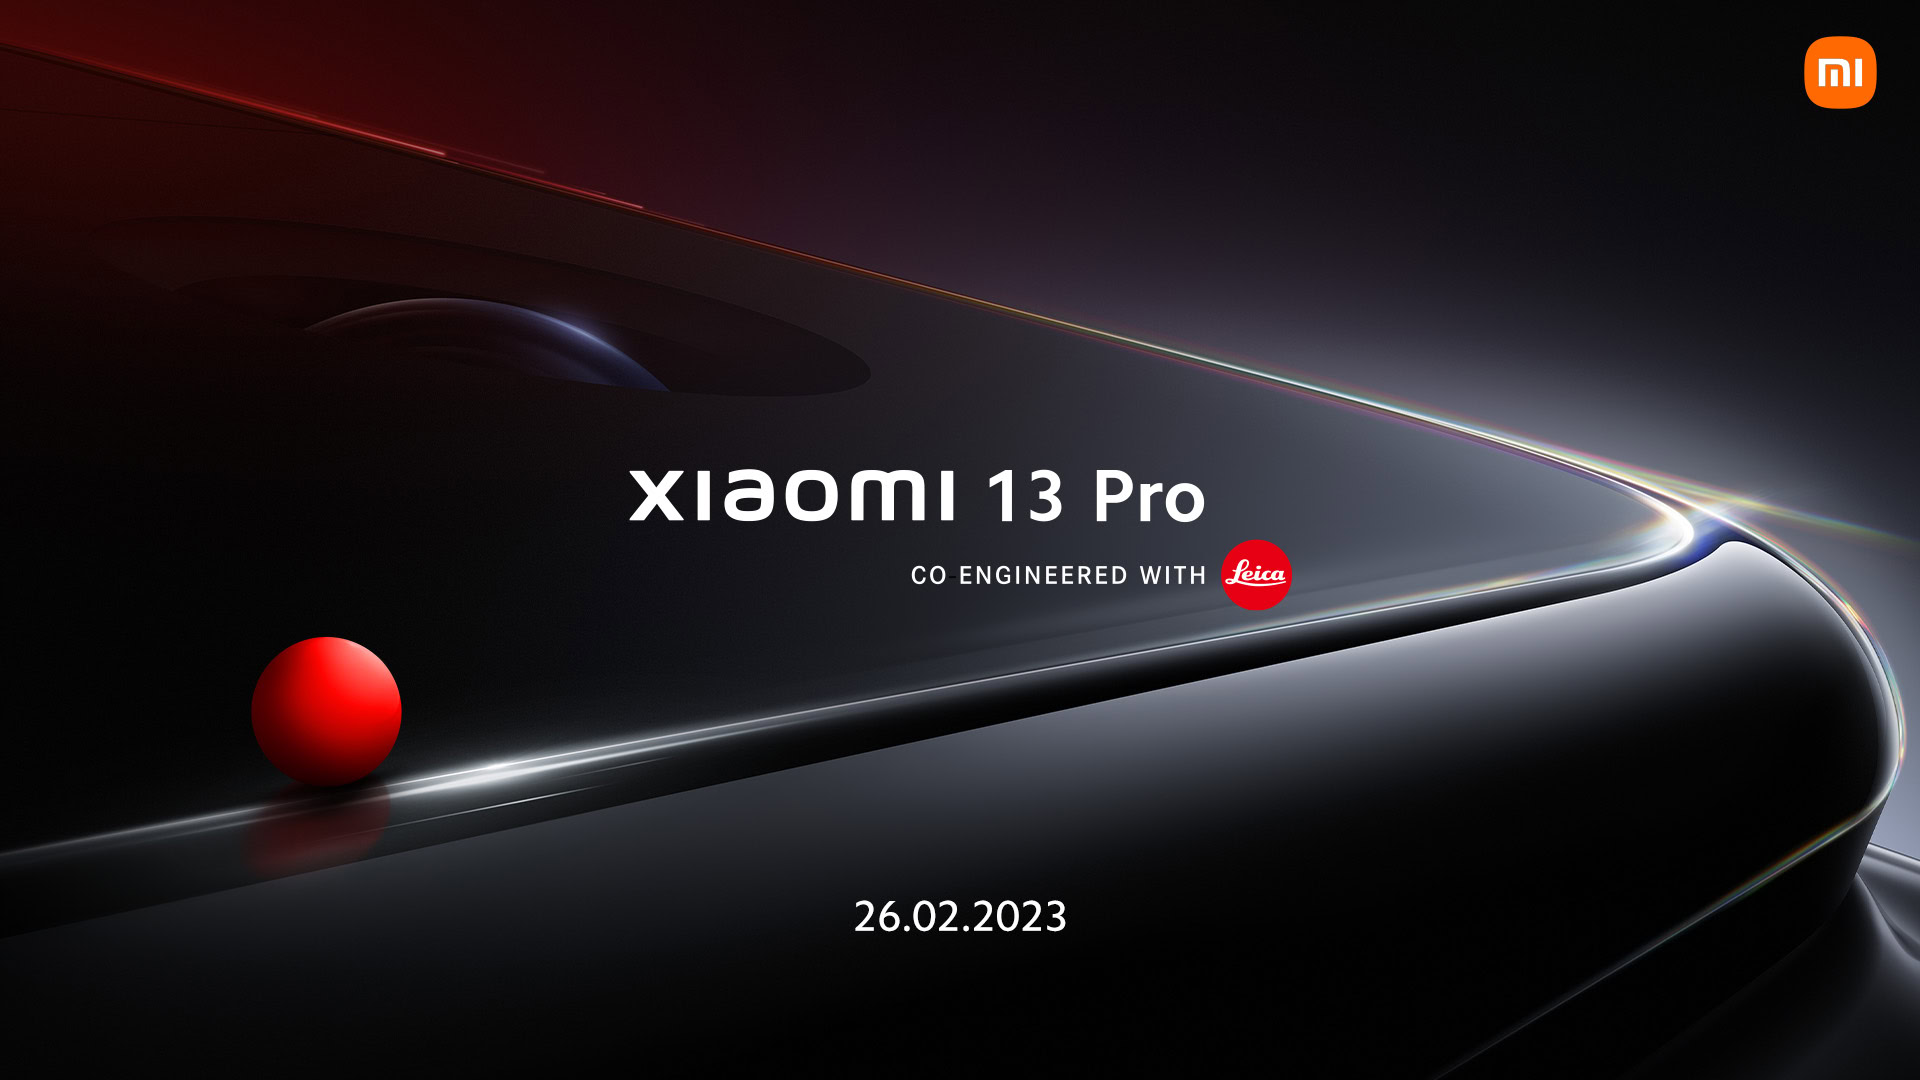 Xiaomi 13 Pro showcased in China ahead of early 2023 global